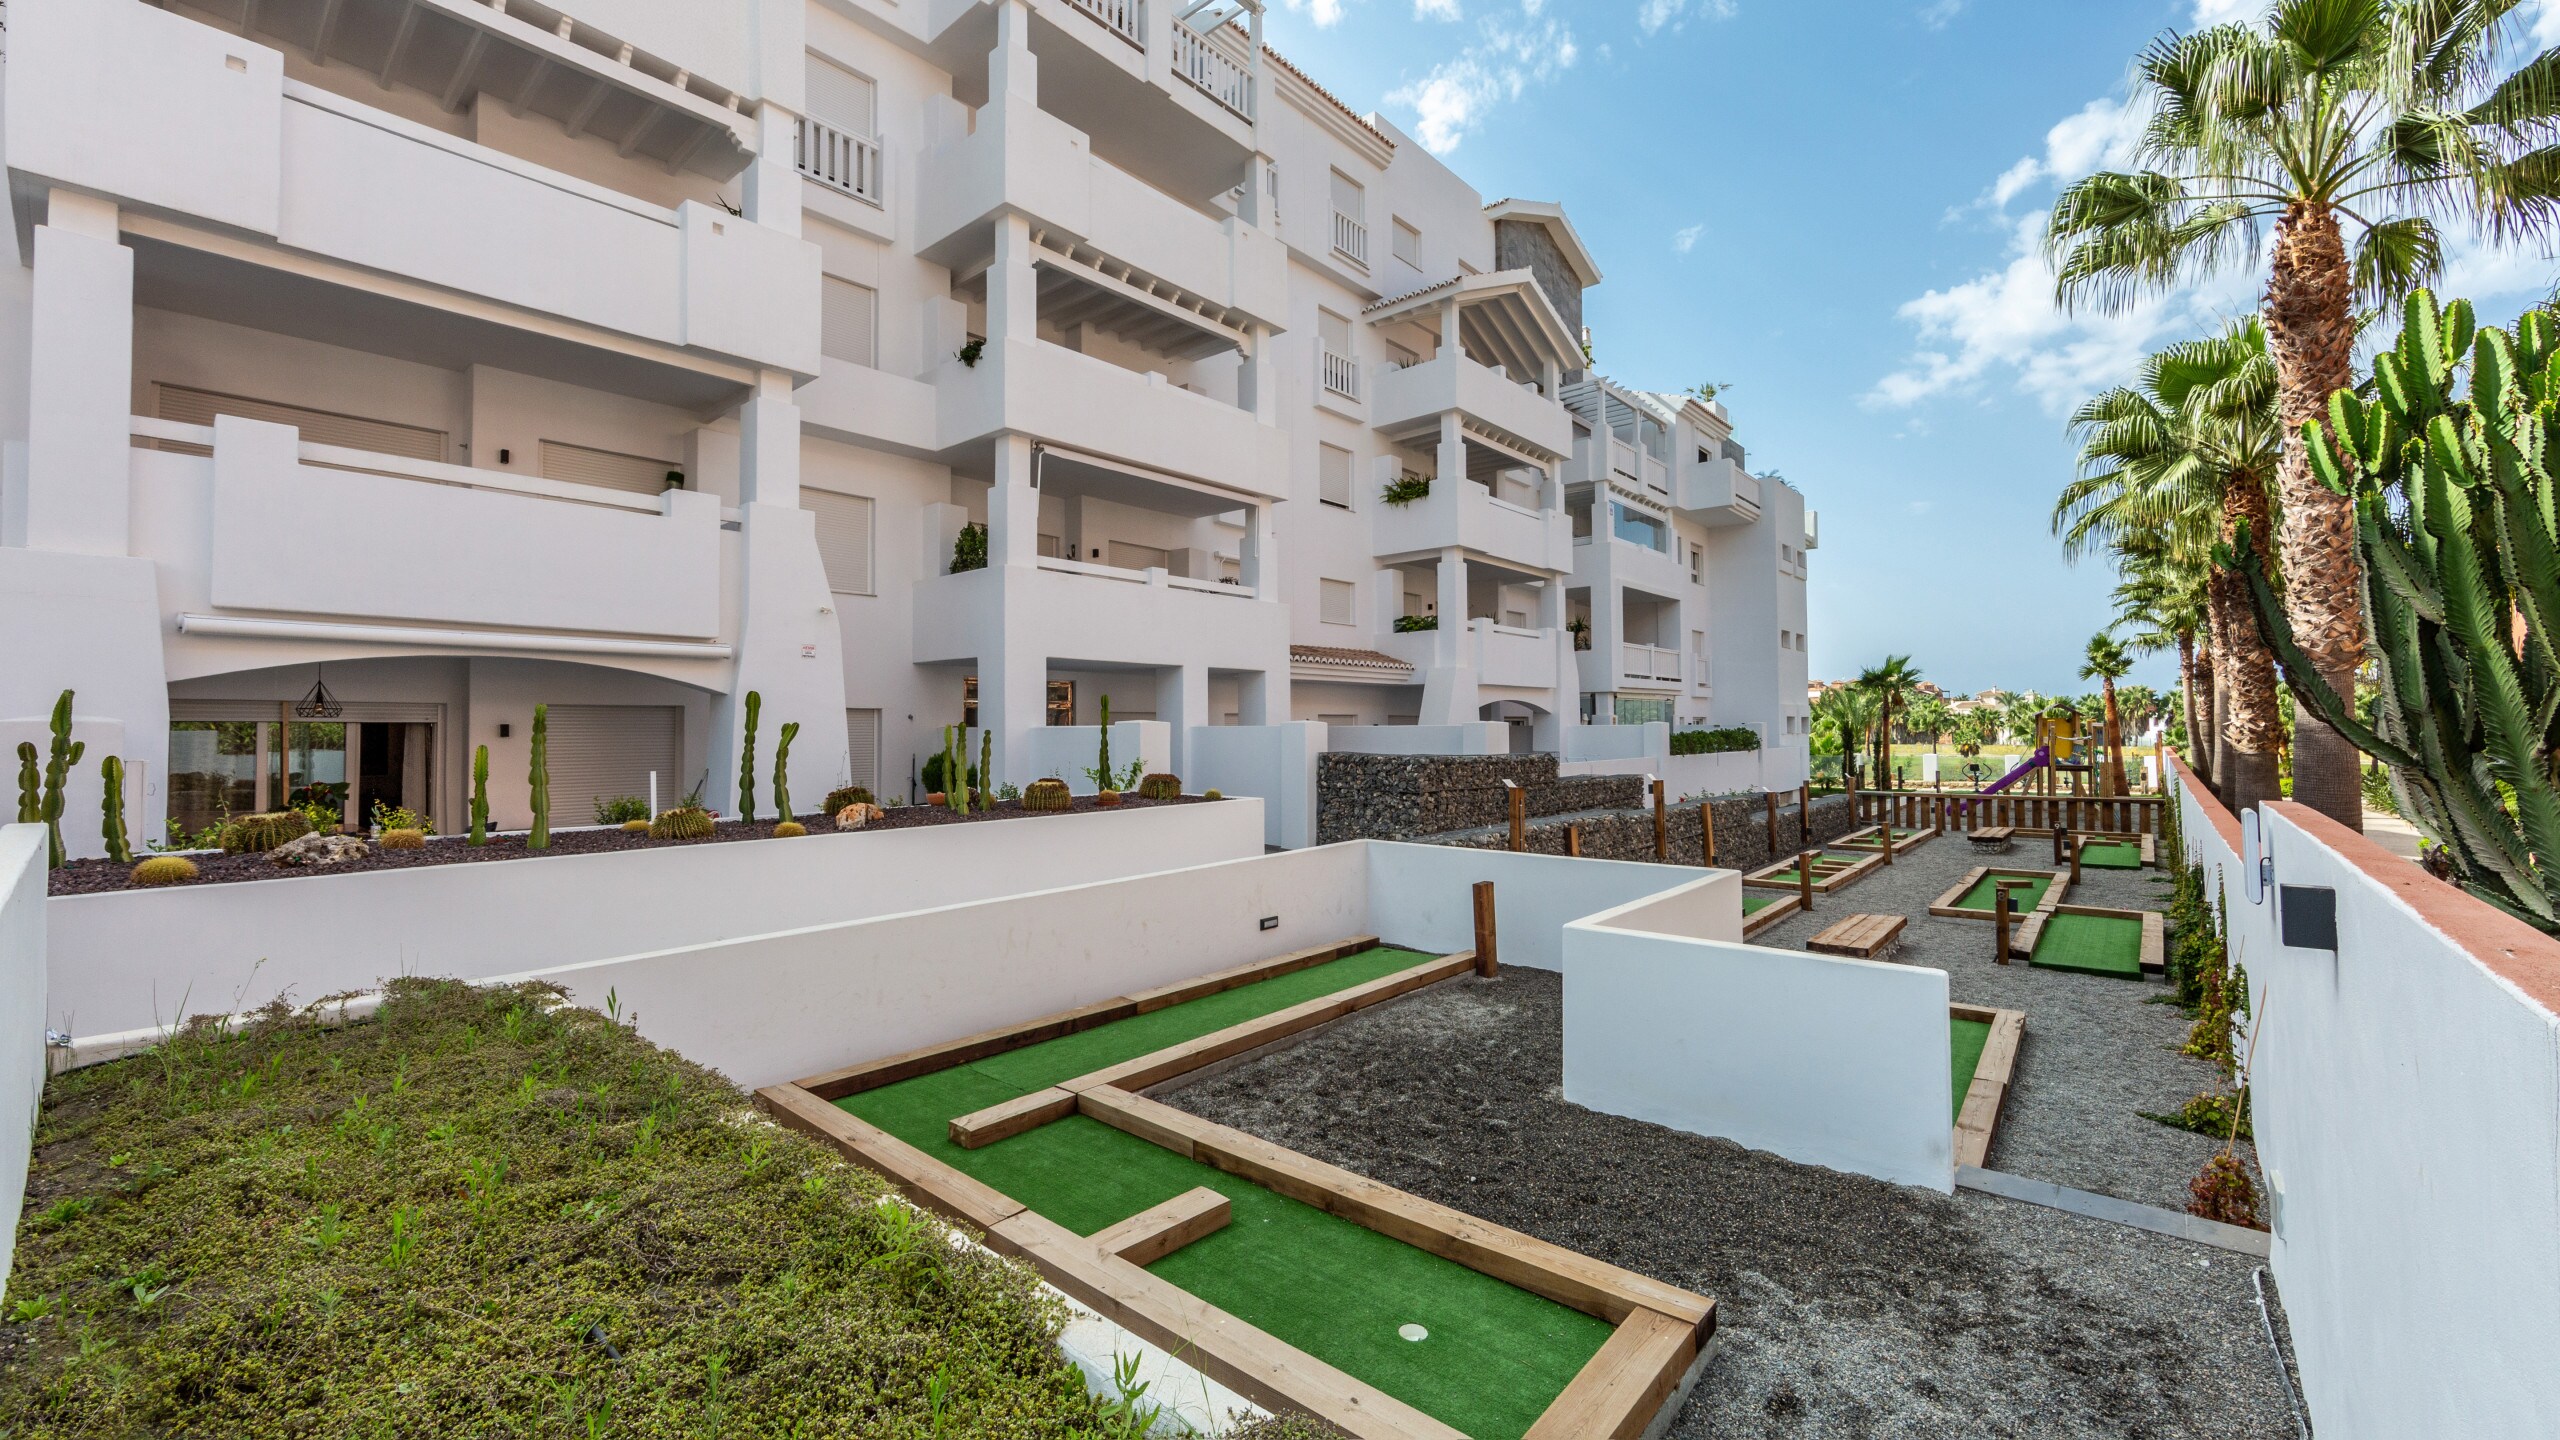 2 bedroom and 2 bathroom apartment with beautiful golf views and fully equipped with the best brands